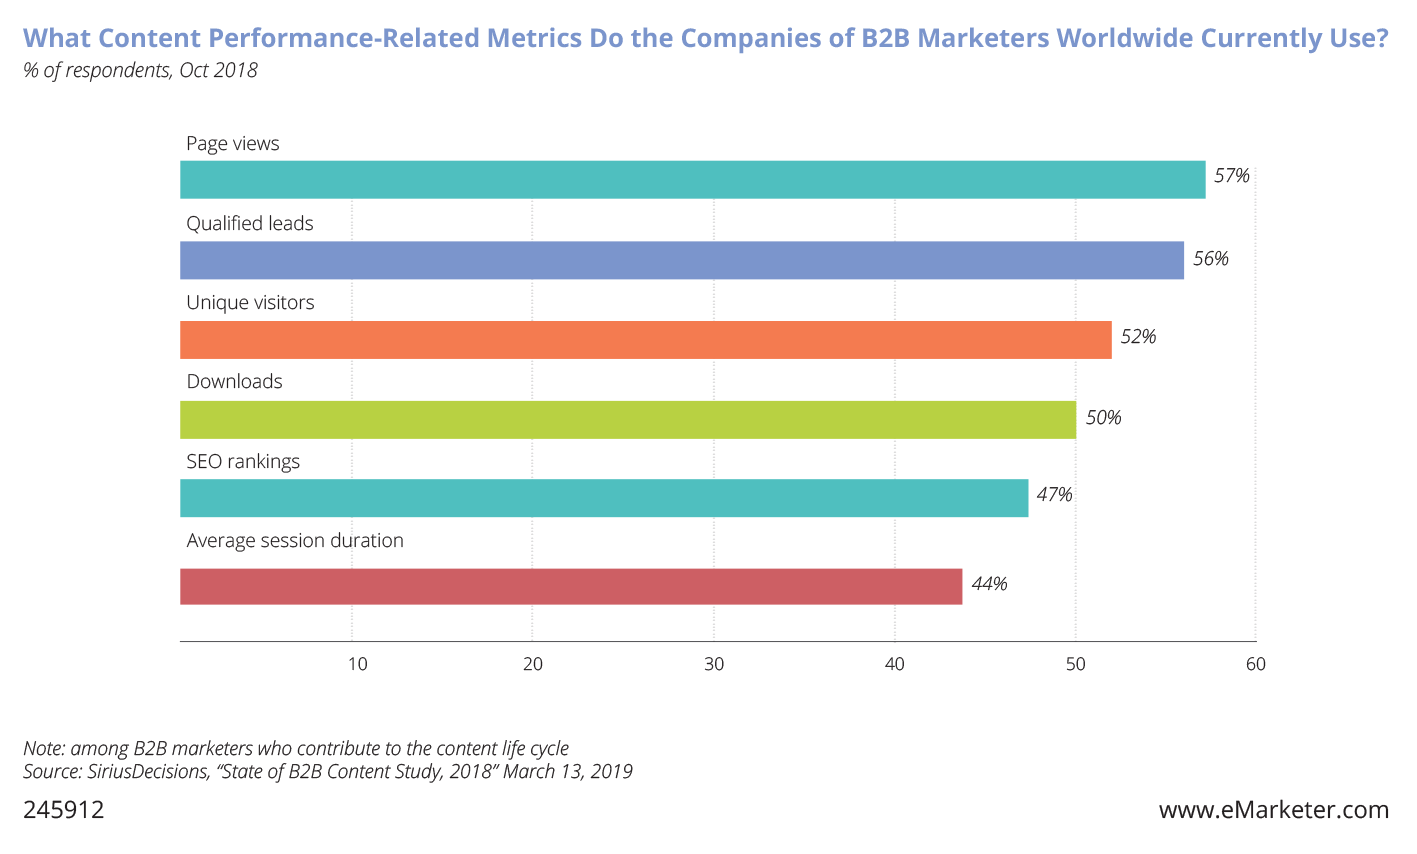 What content performance related metrics do the companies of B2B marketers worldwide currently use?